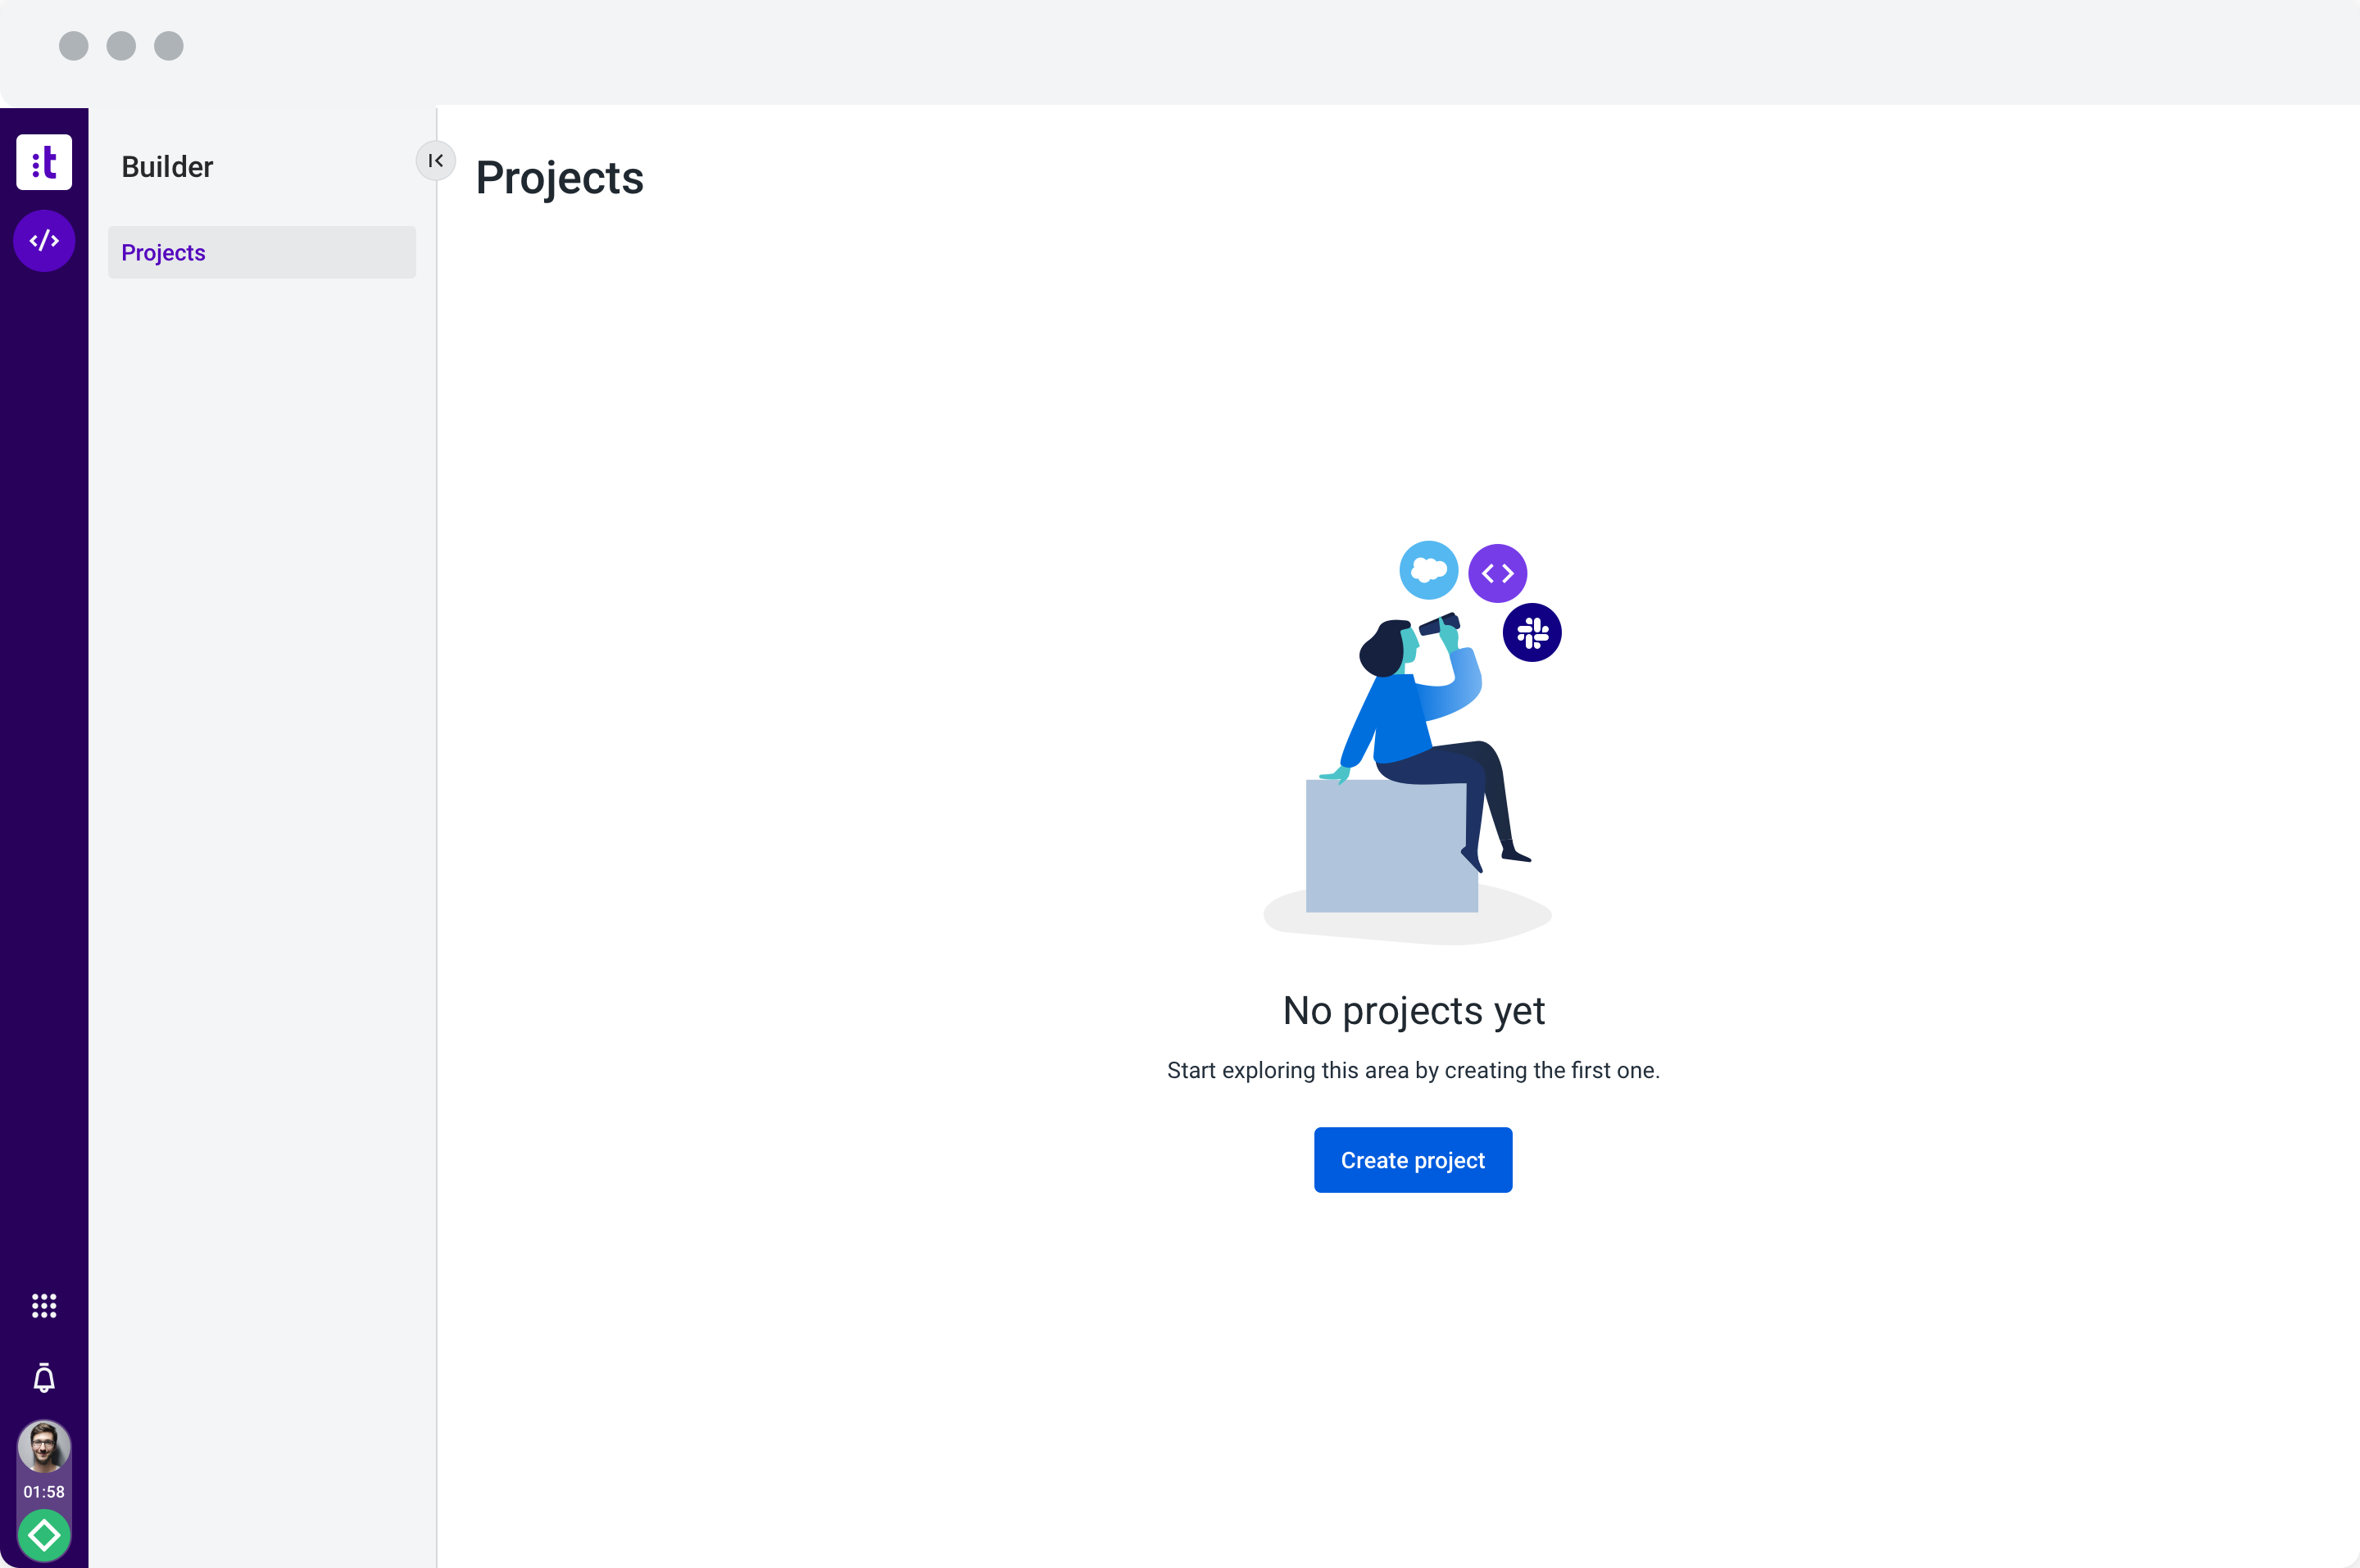 Landing page of the Talkdesk Partner Project